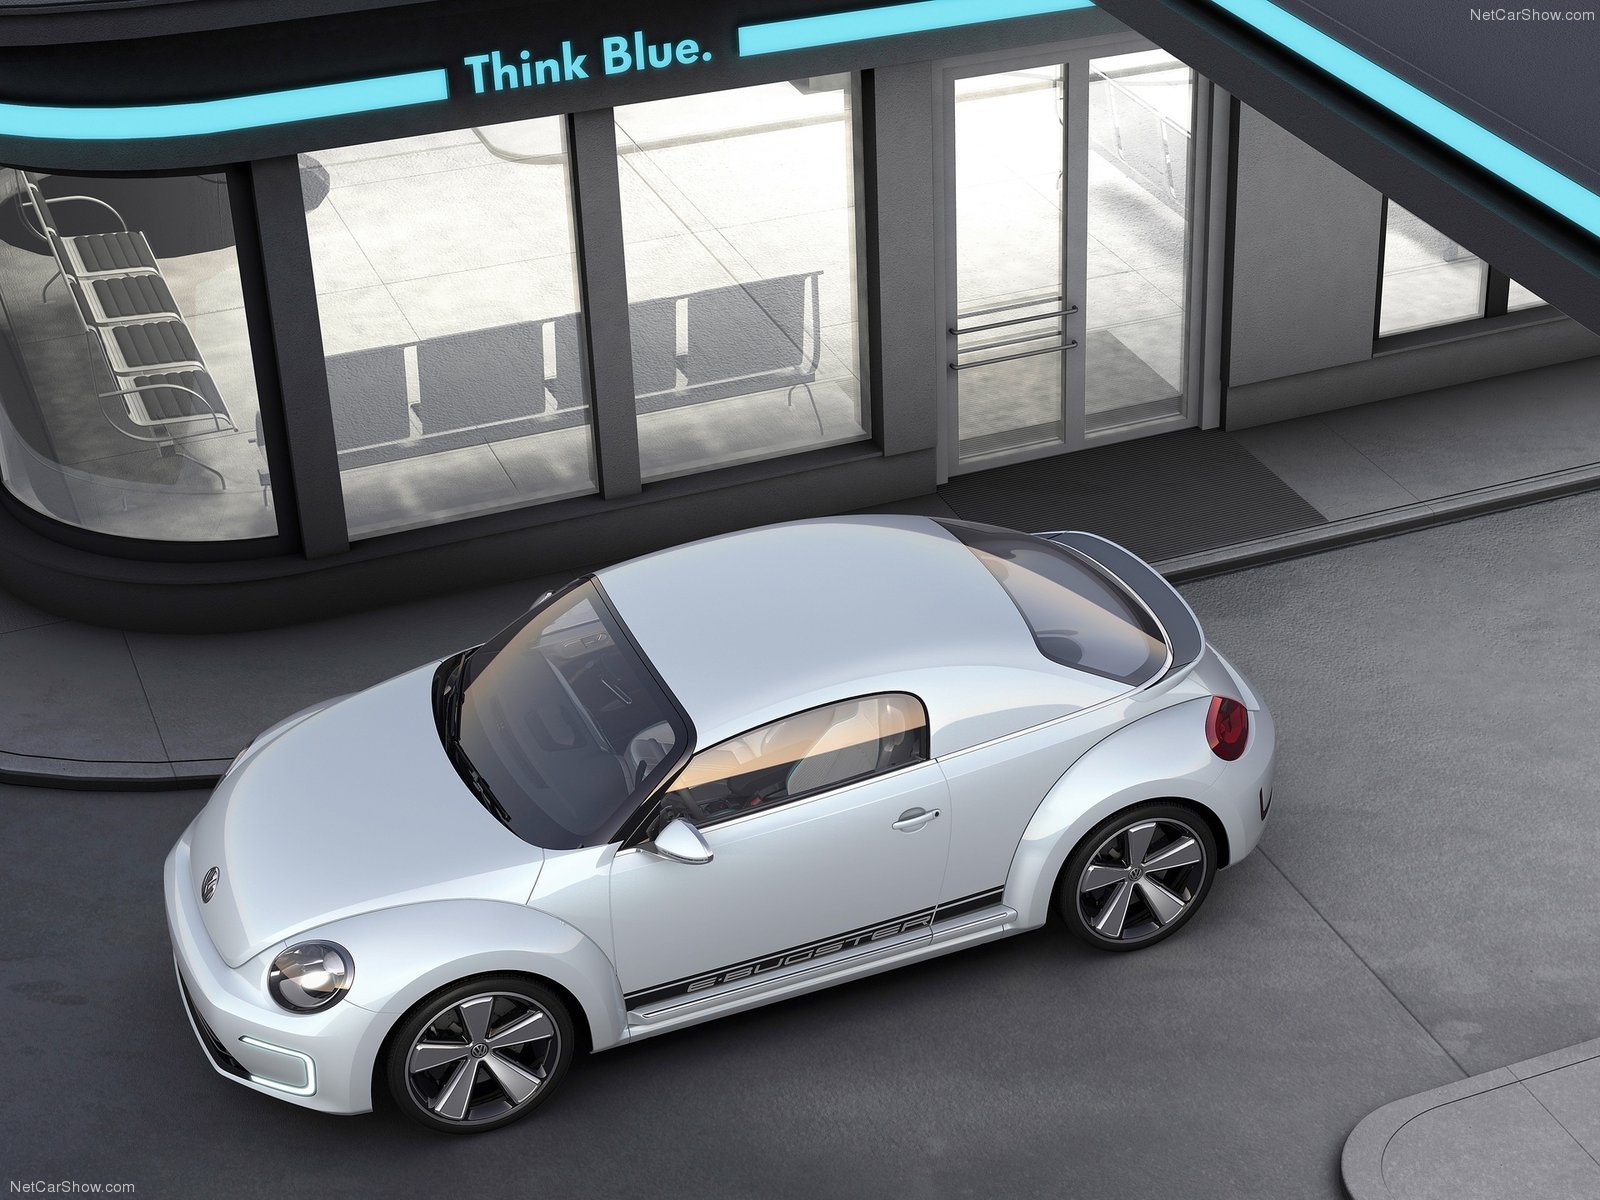 volkswagen, E bugster, Concept, Cars, Electric Wallpaper